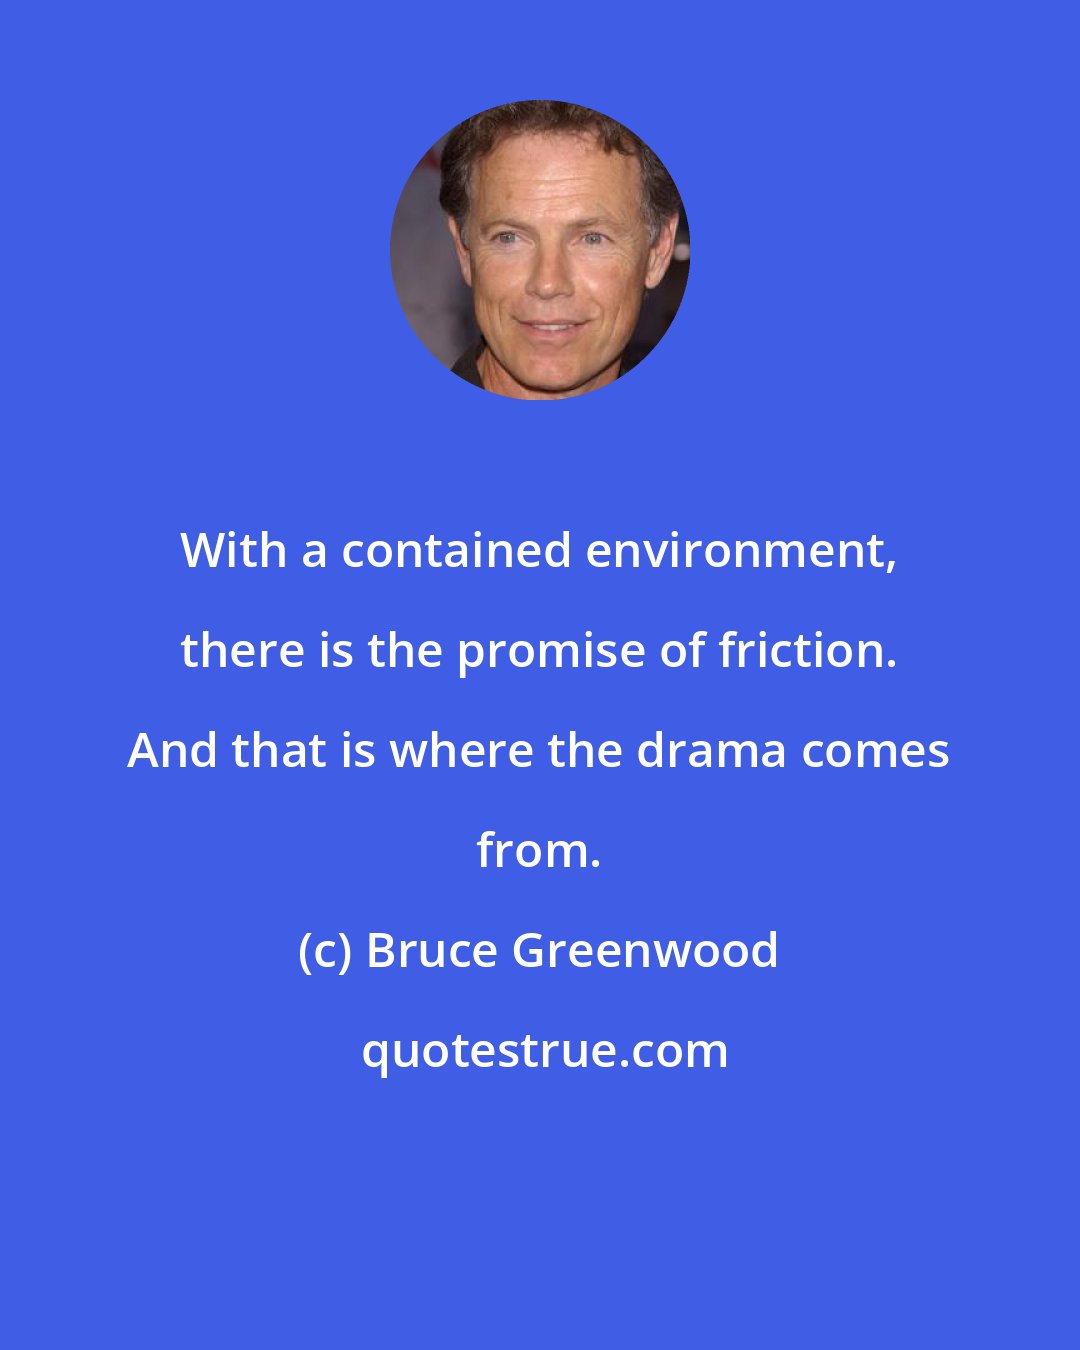 Bruce Greenwood: With a contained environment, there is the promise of friction. And that is where the drama comes from.